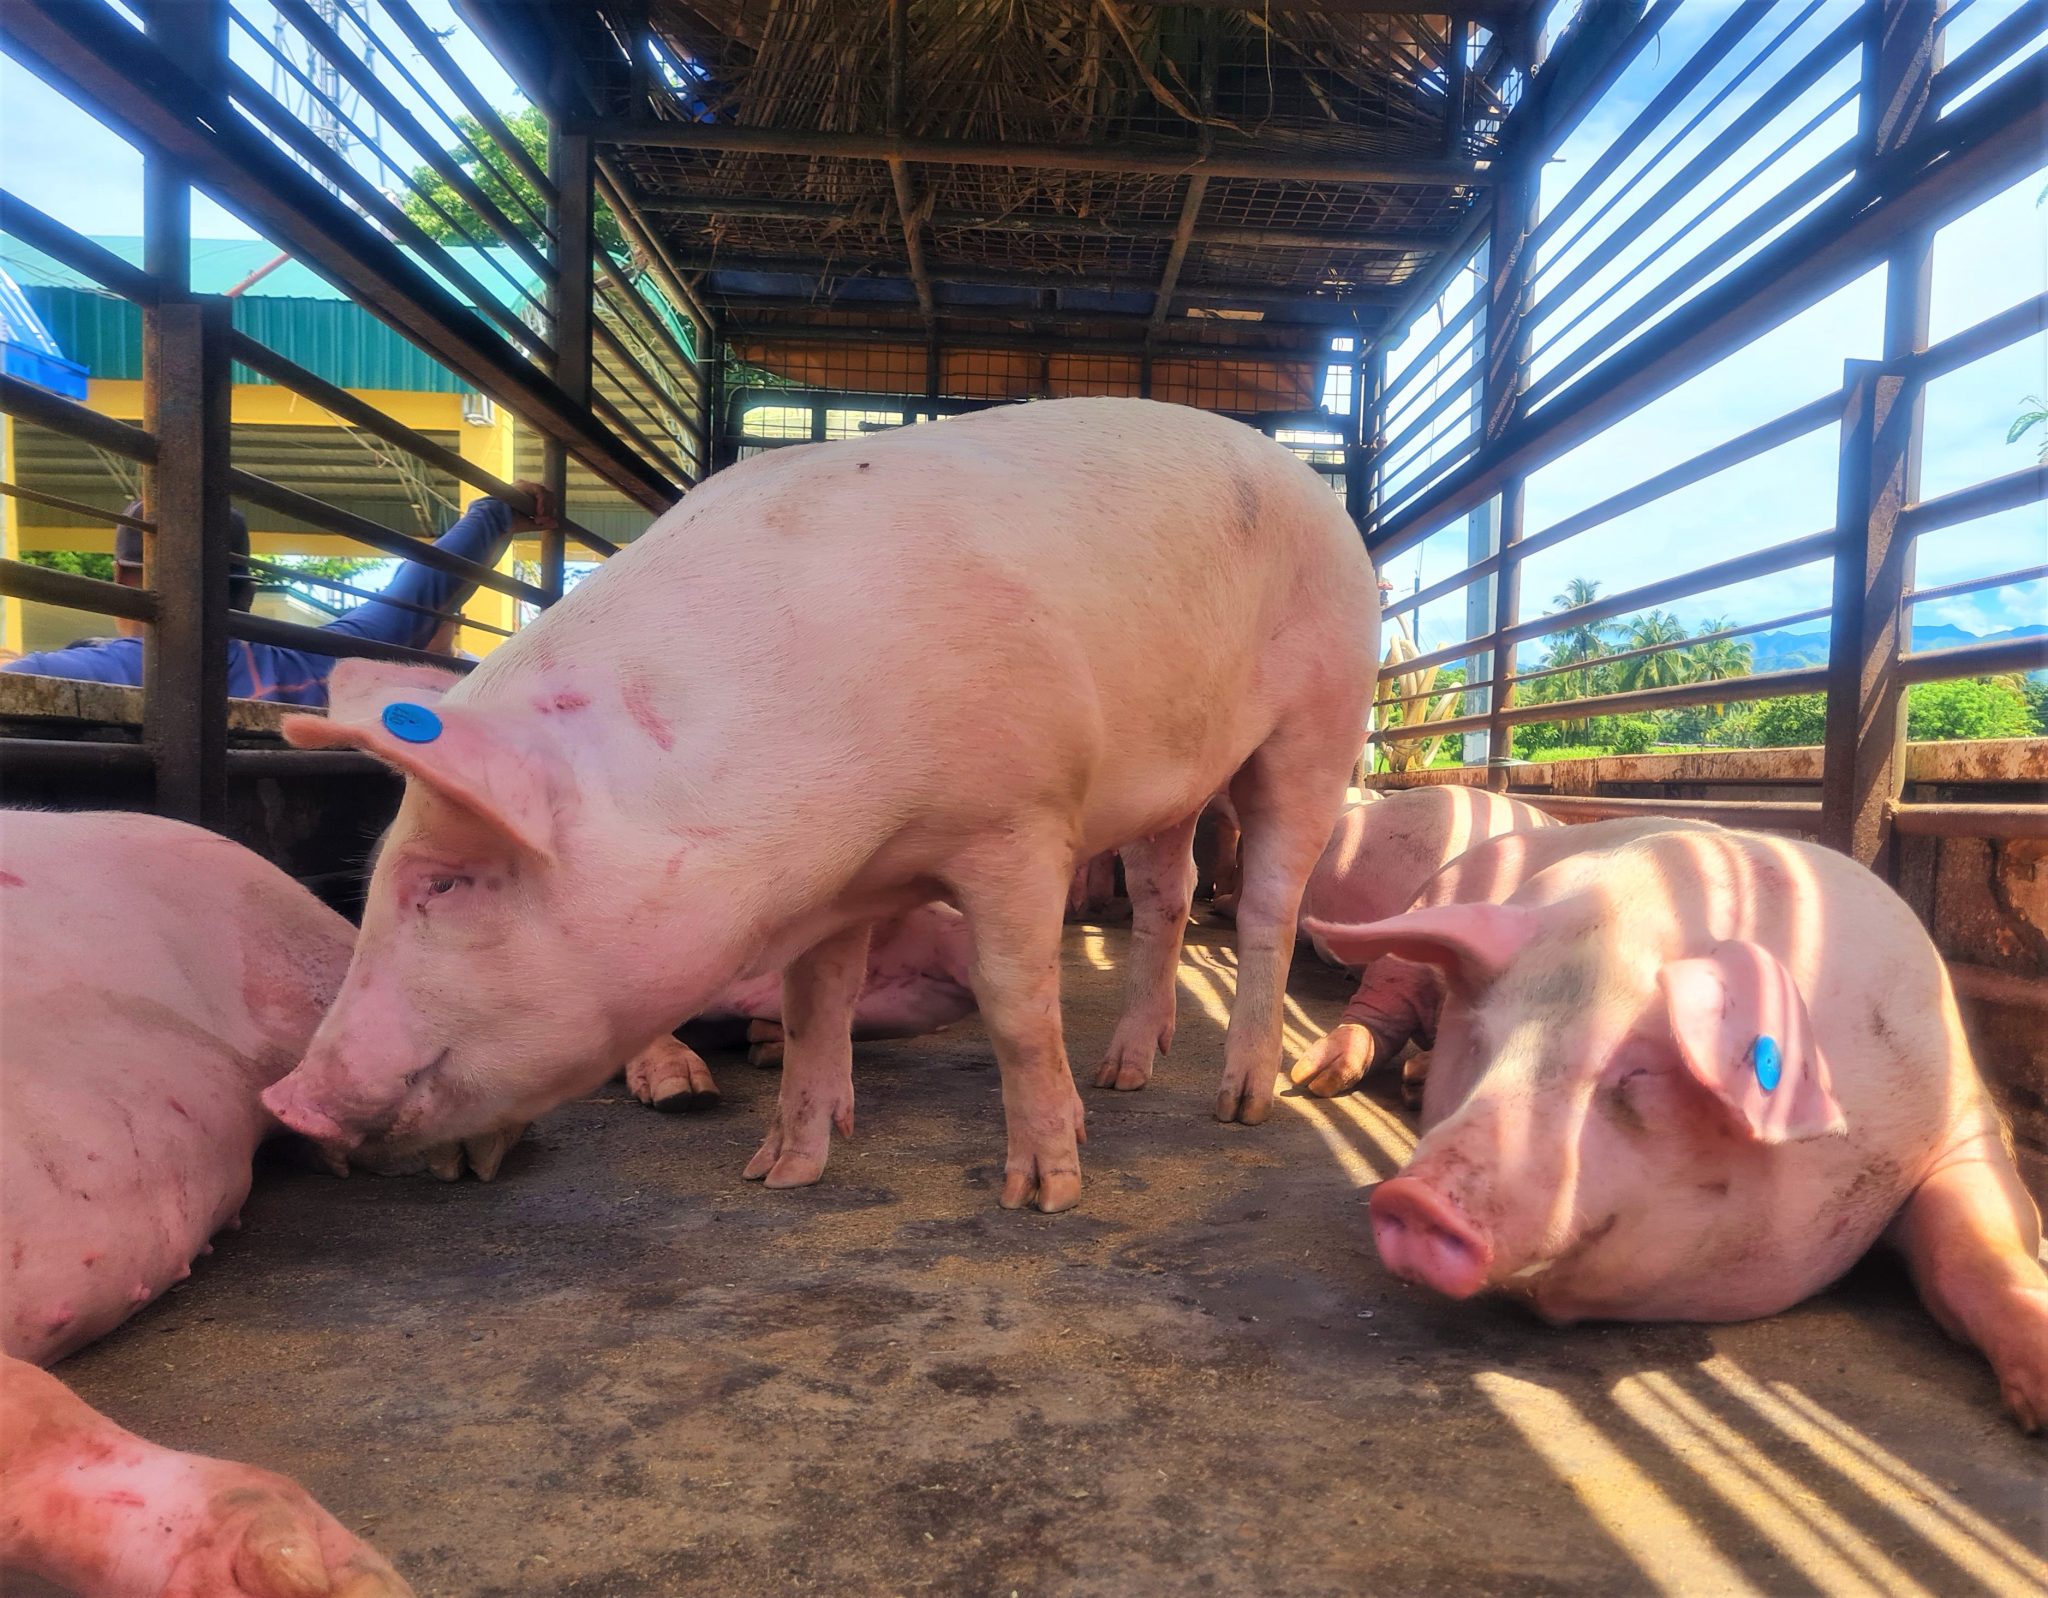 60 Antique farmers expect increase in hog production